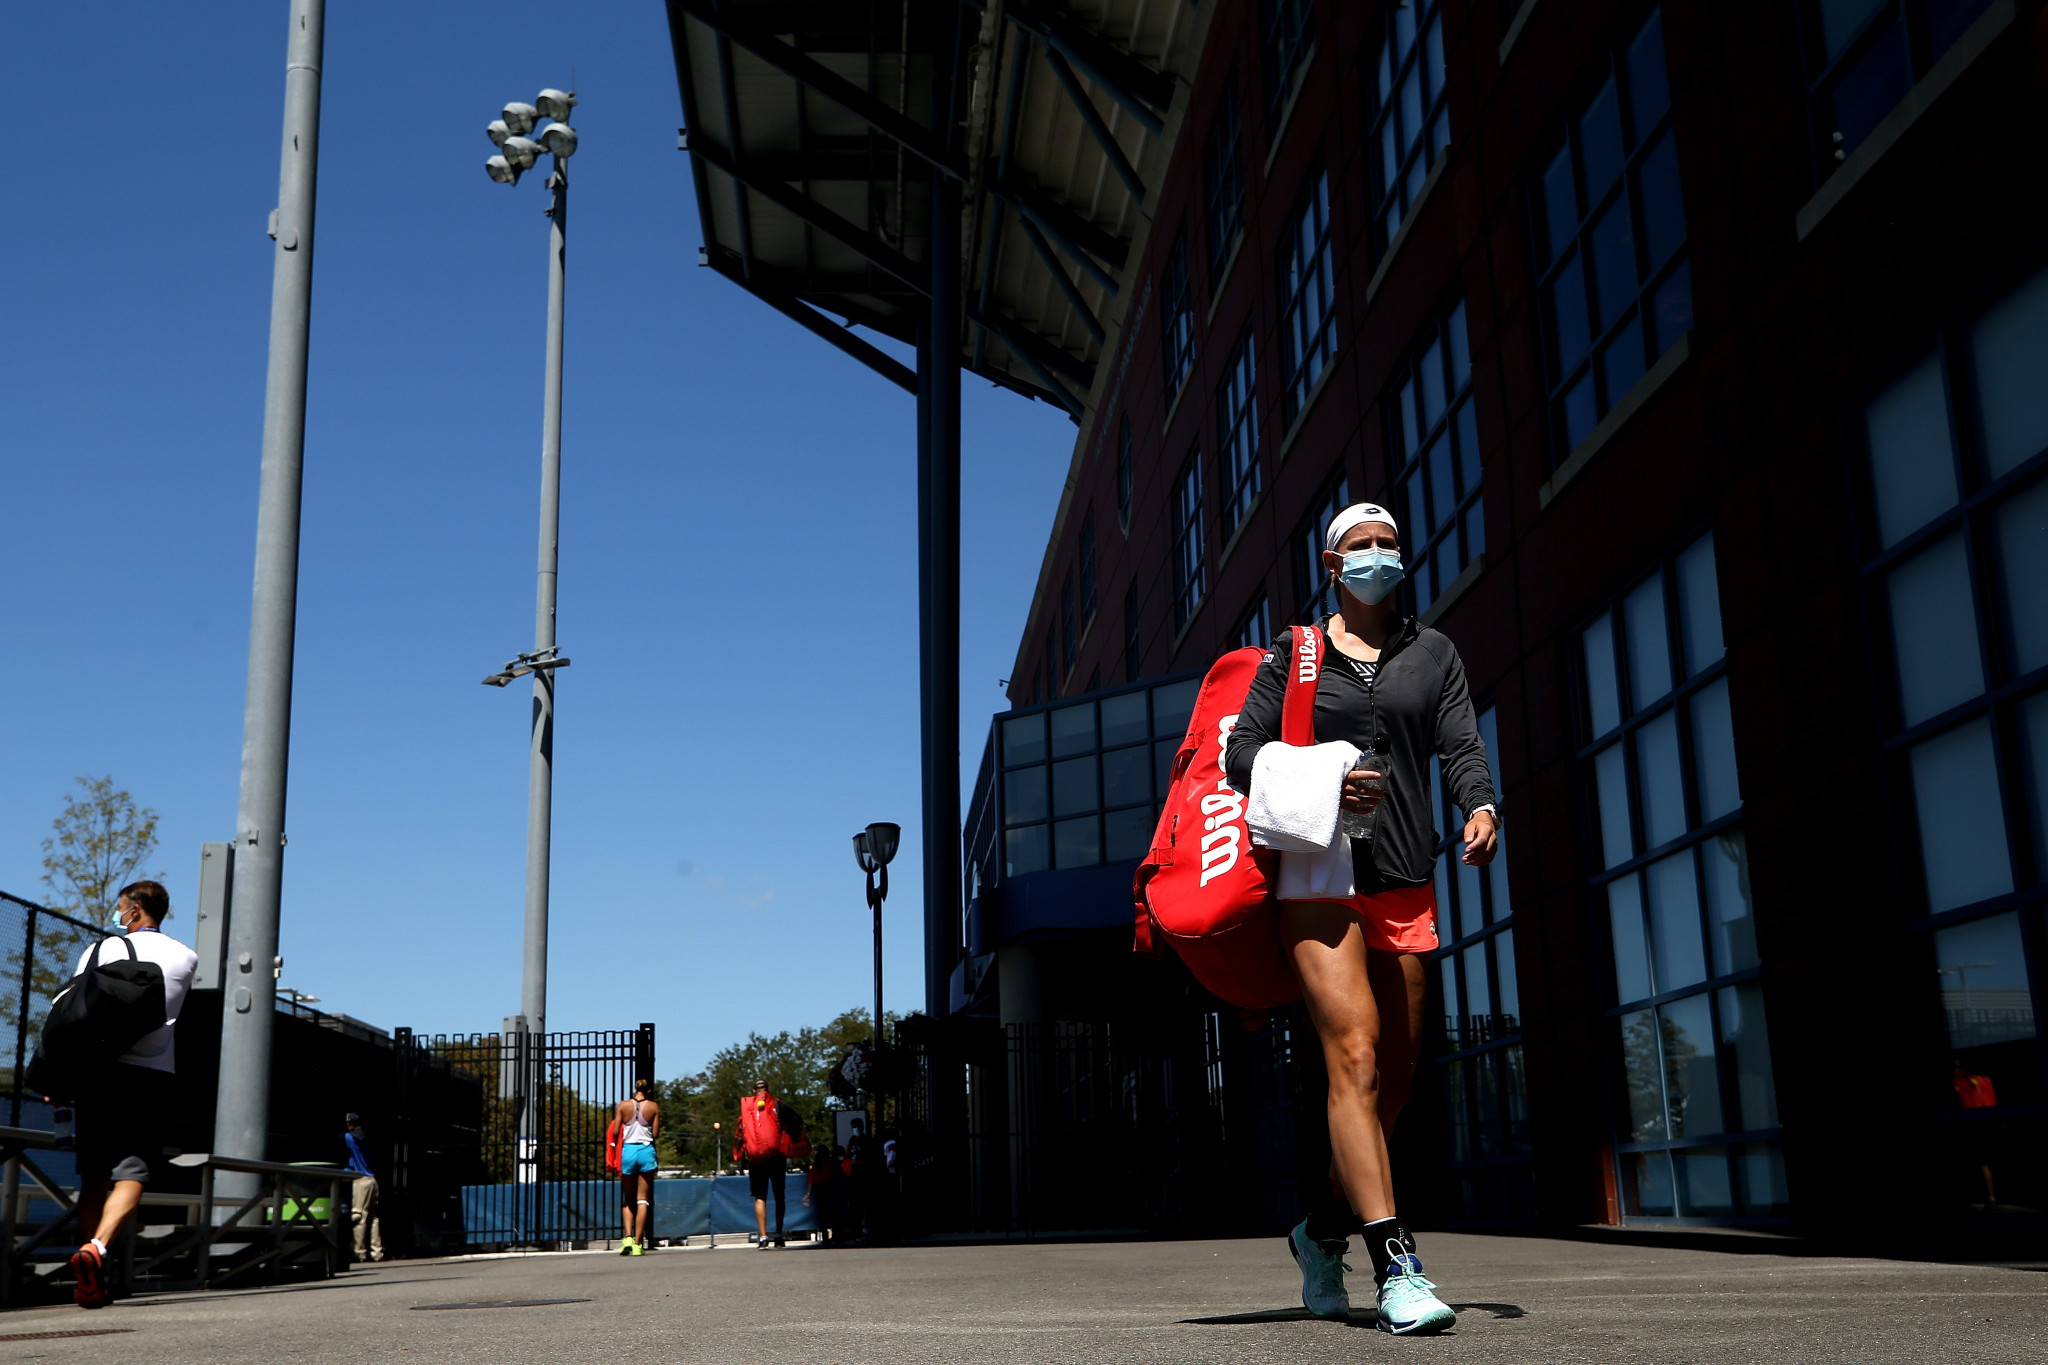 Cincinnati Masters to serve as key warm-up for US Open